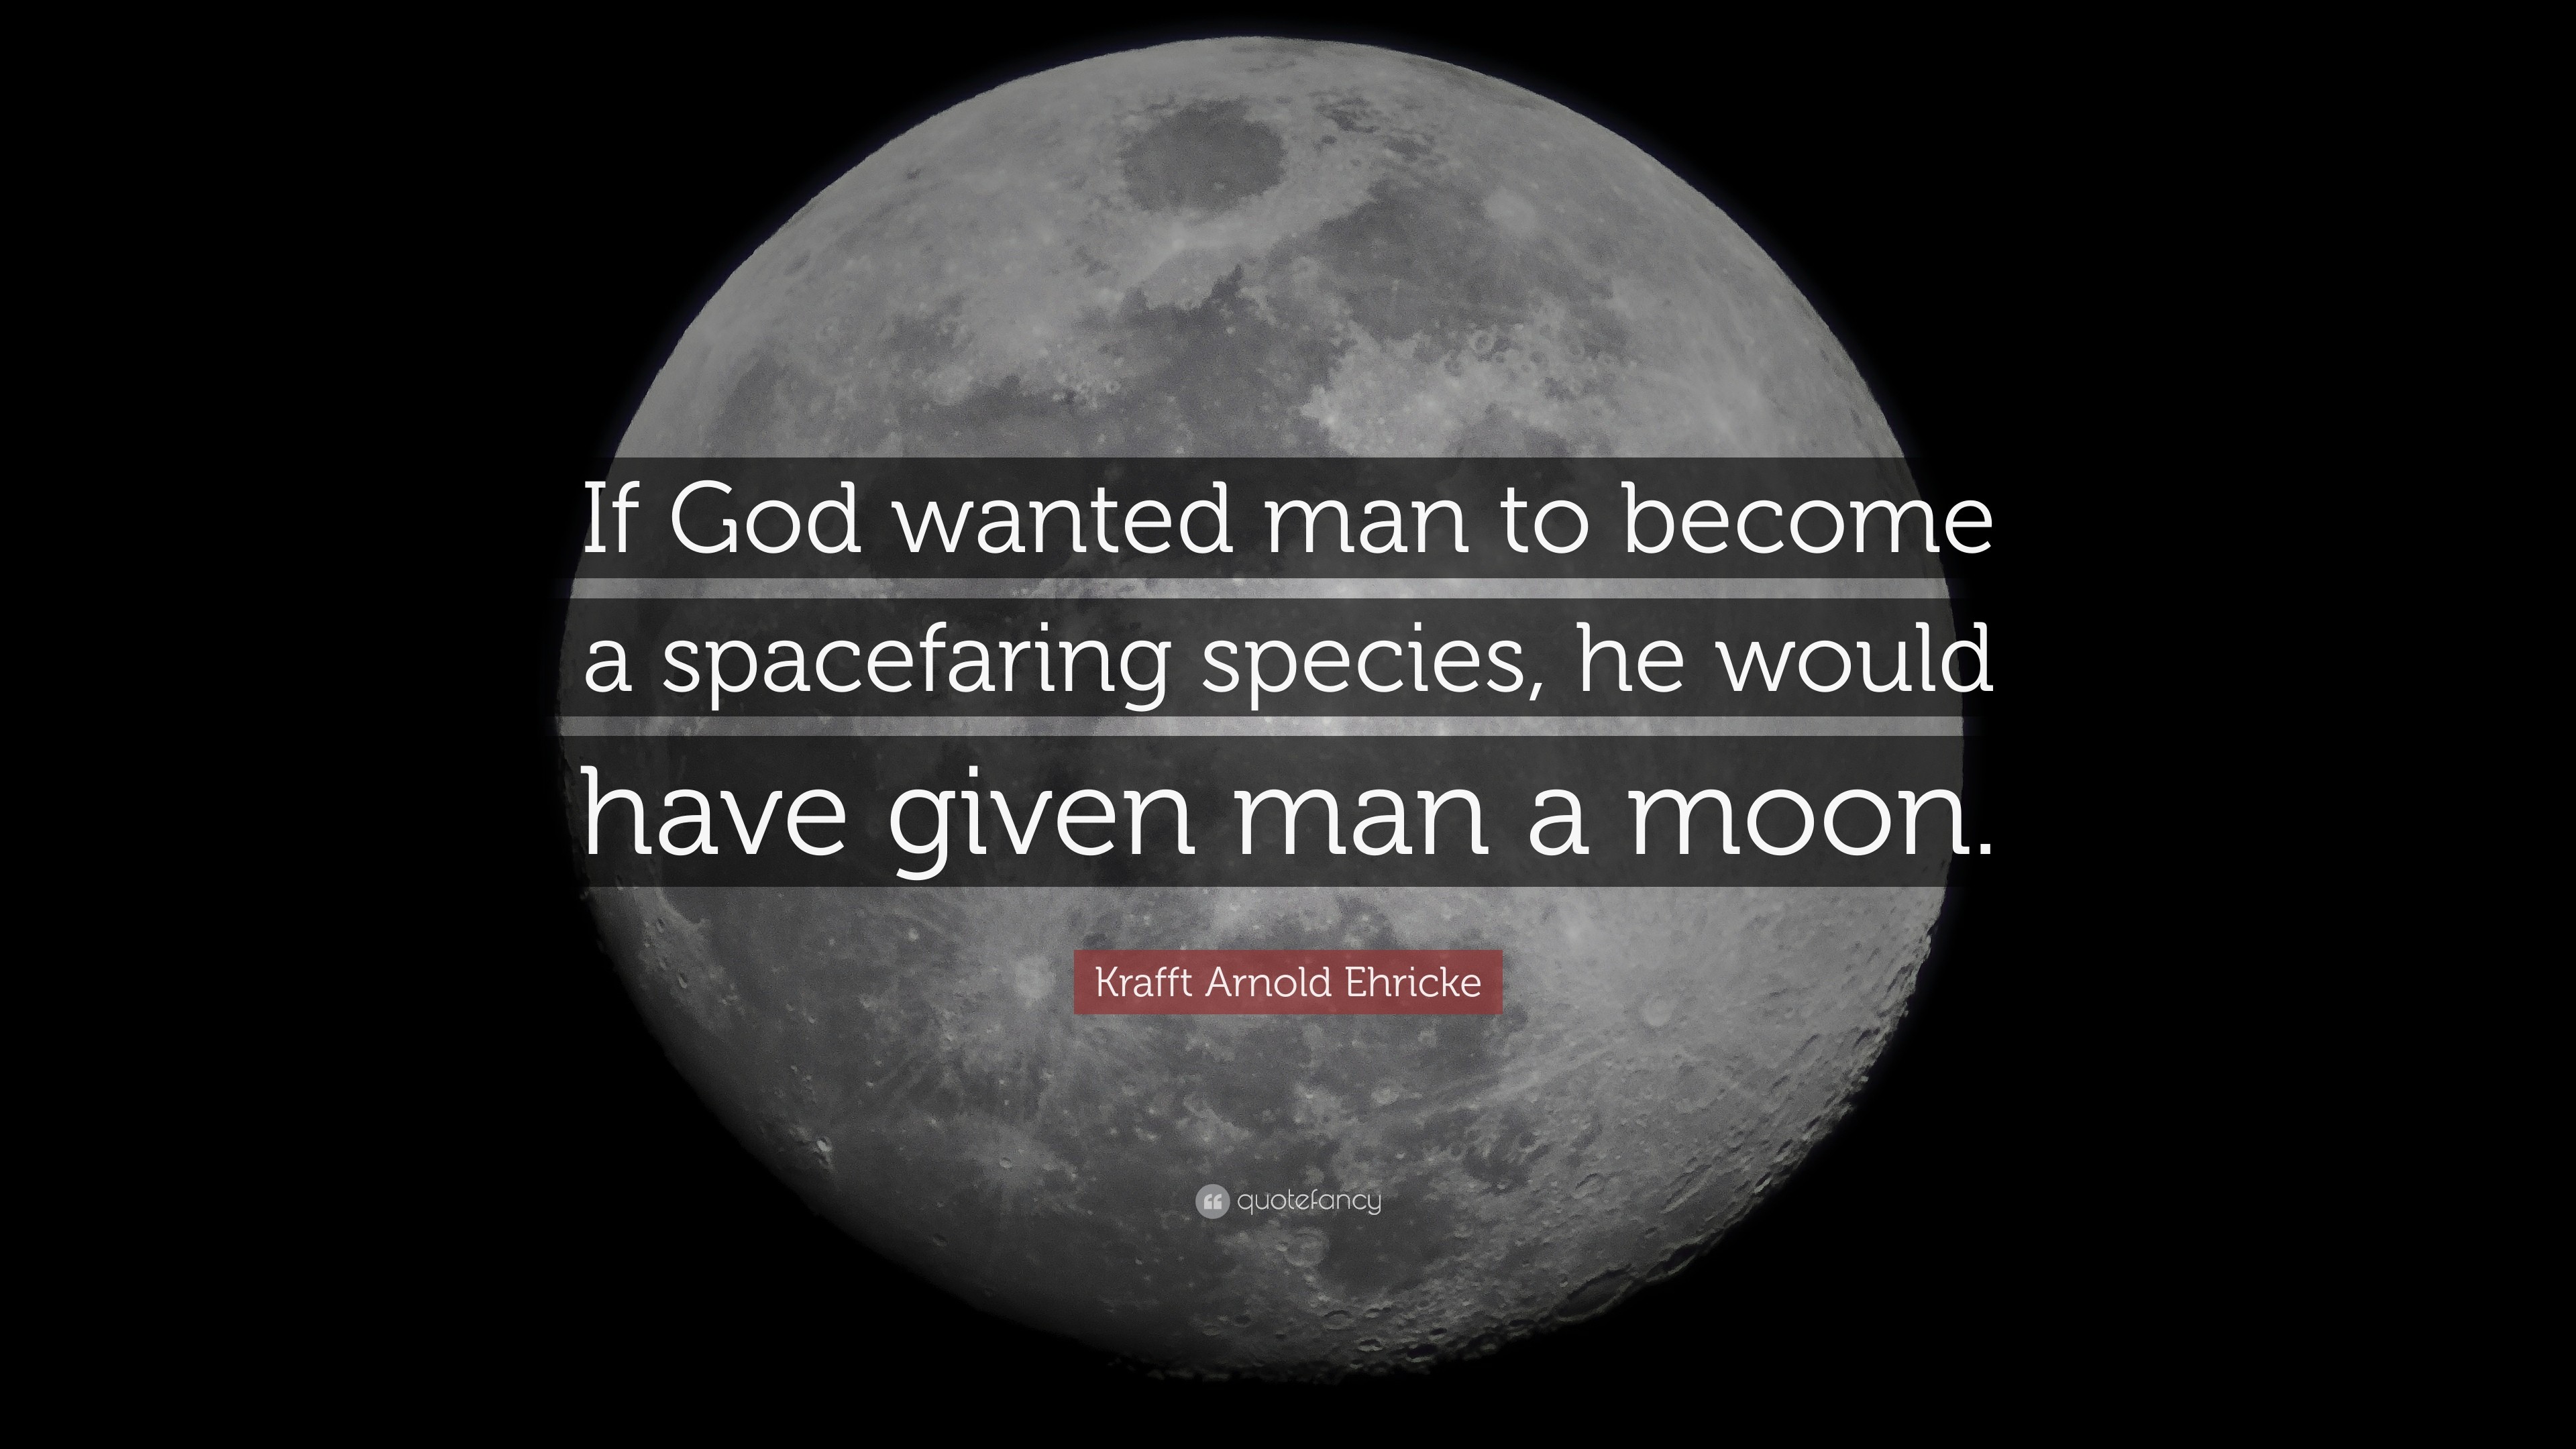 3840x2160 Moon Quotes: “If God wanted man to become a spacefaring species, he would